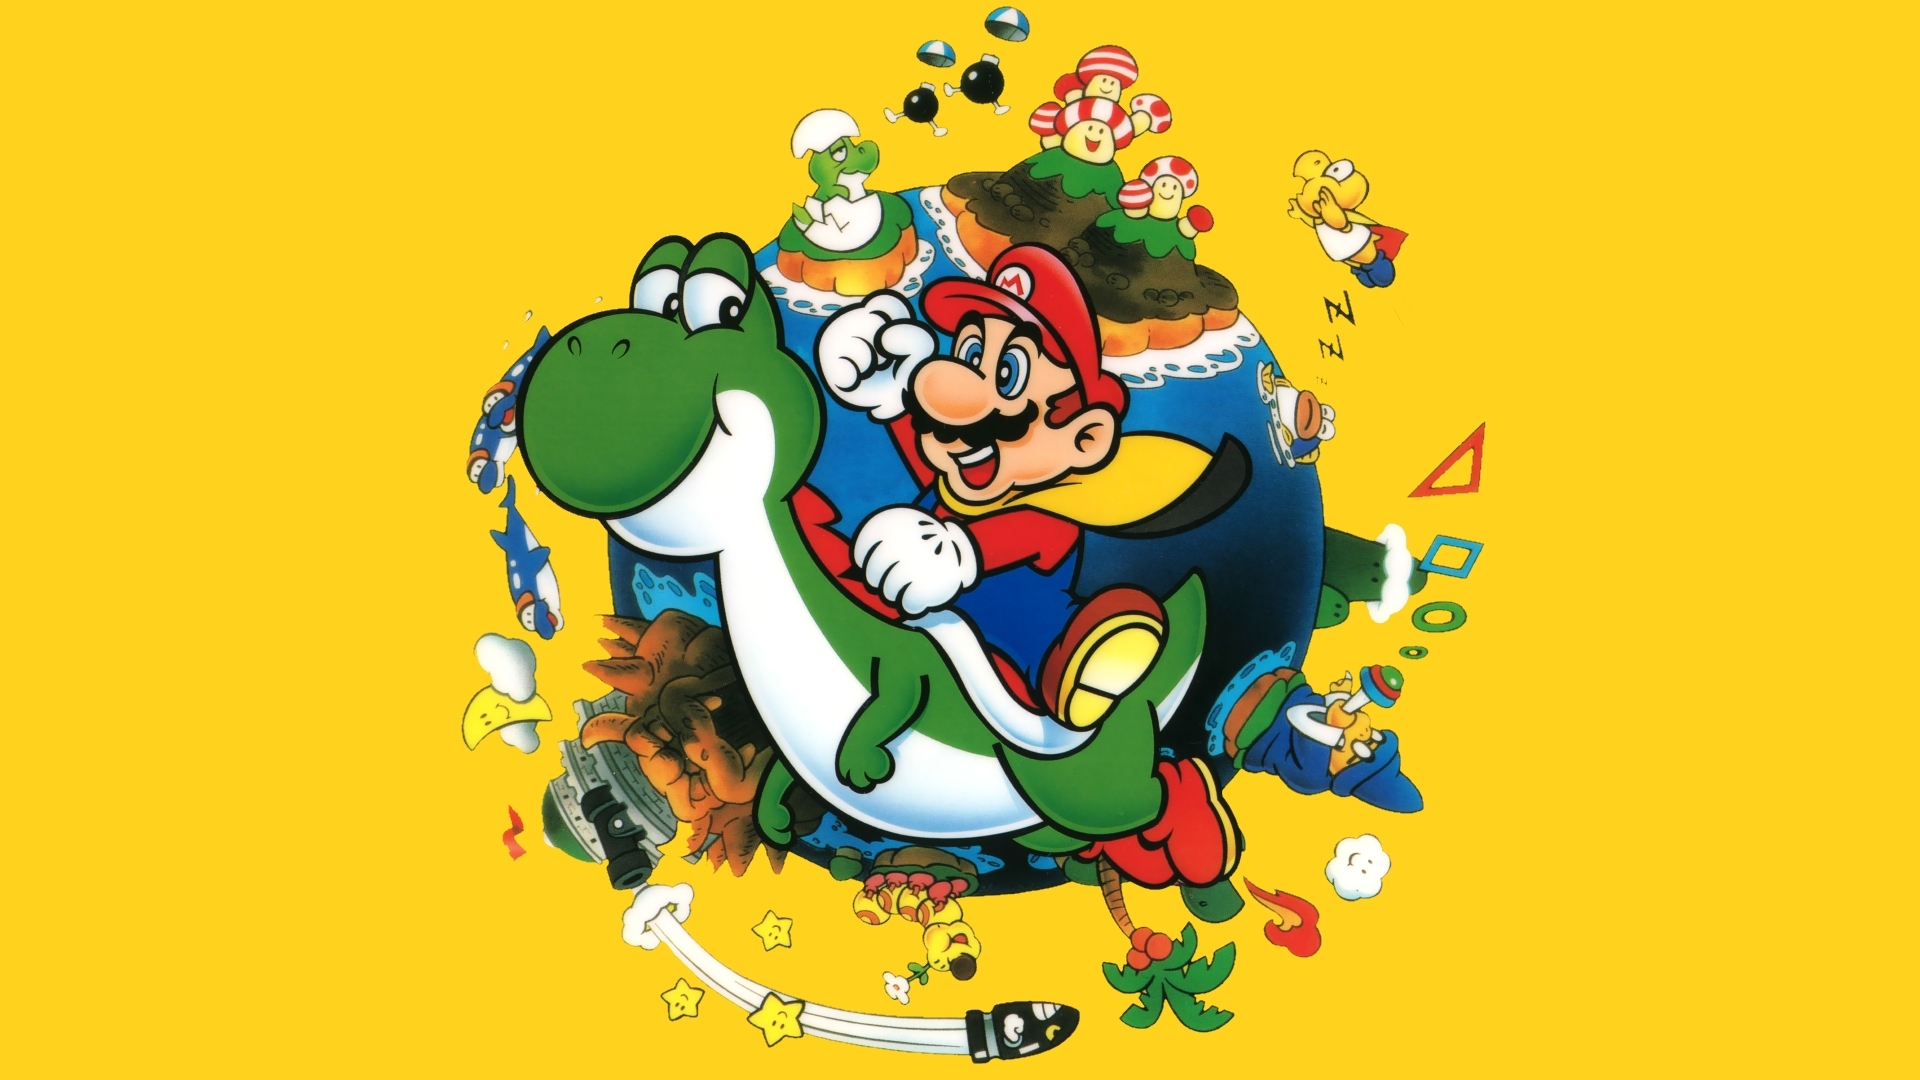 1920x1080 20+ Super Mario World HD Wallpapers and Backgrounds